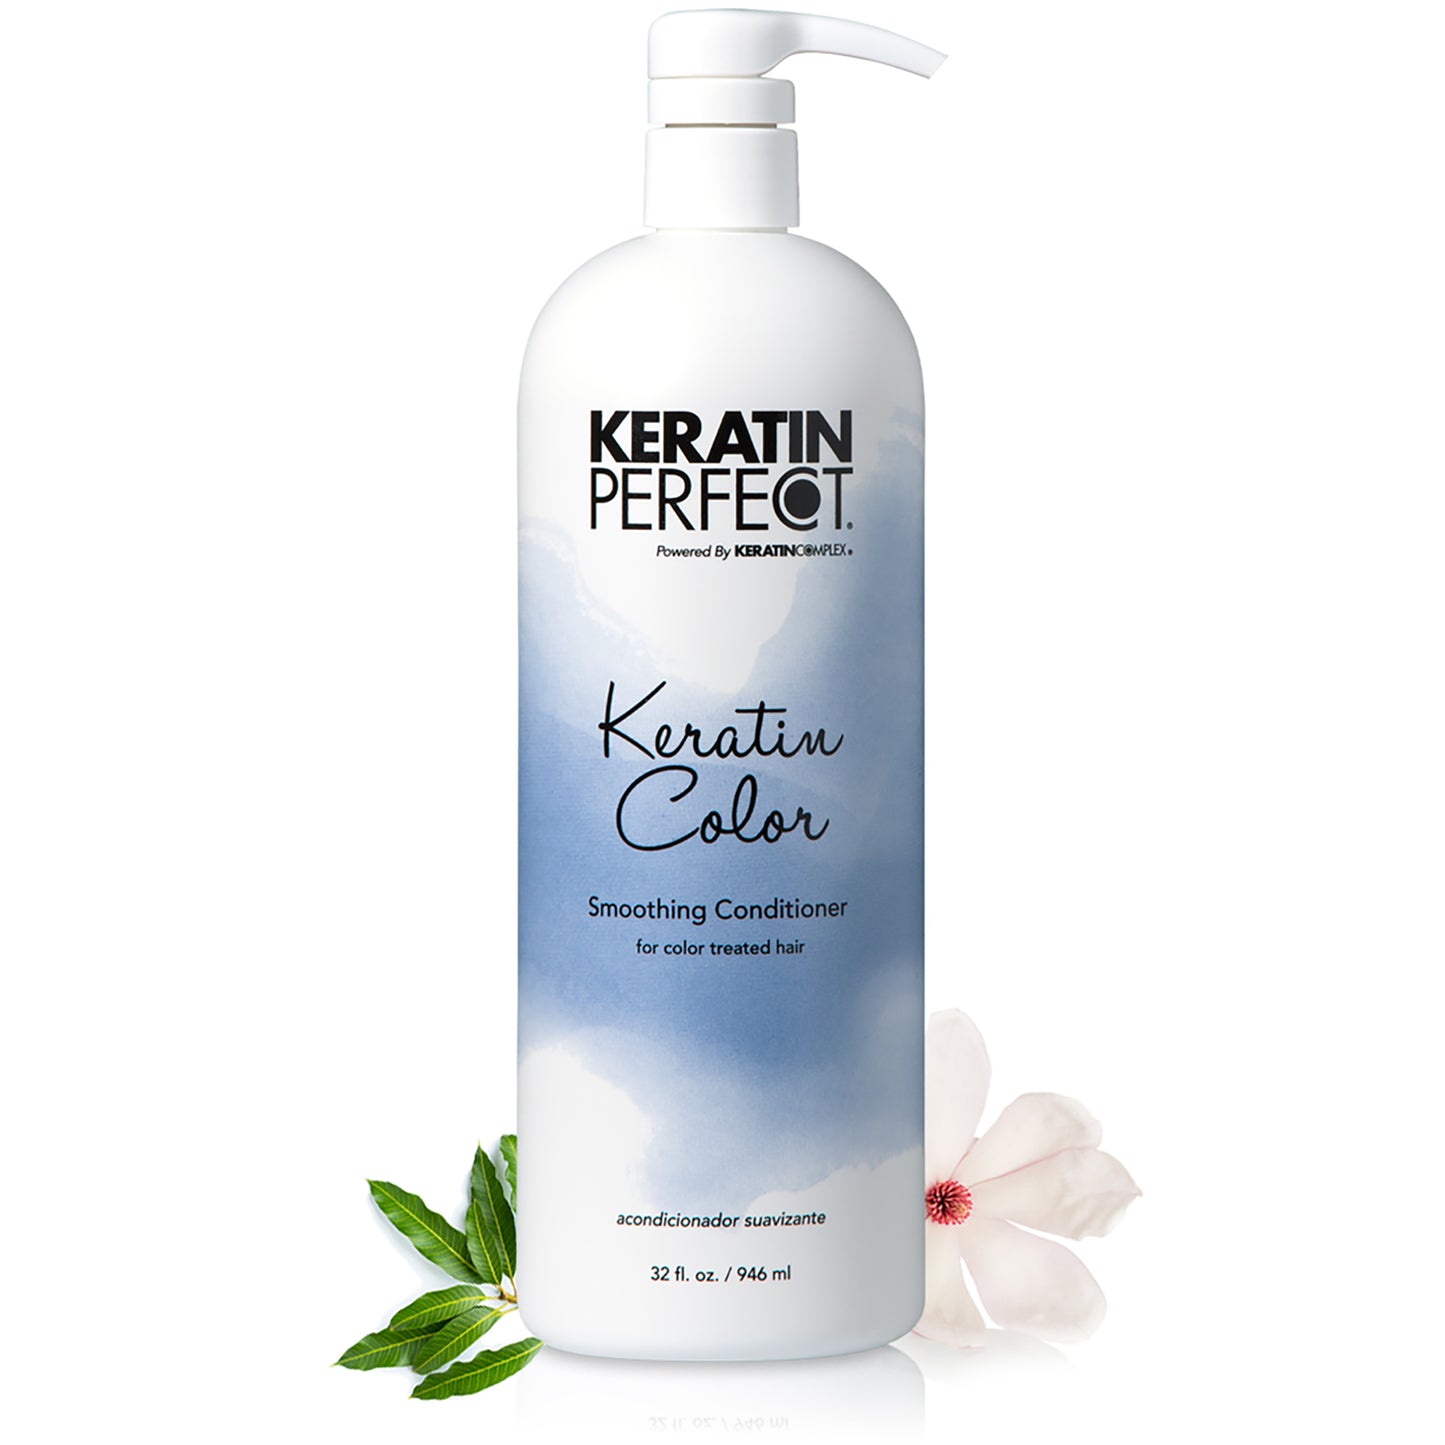 Keratin Color Smoothing Conditioner